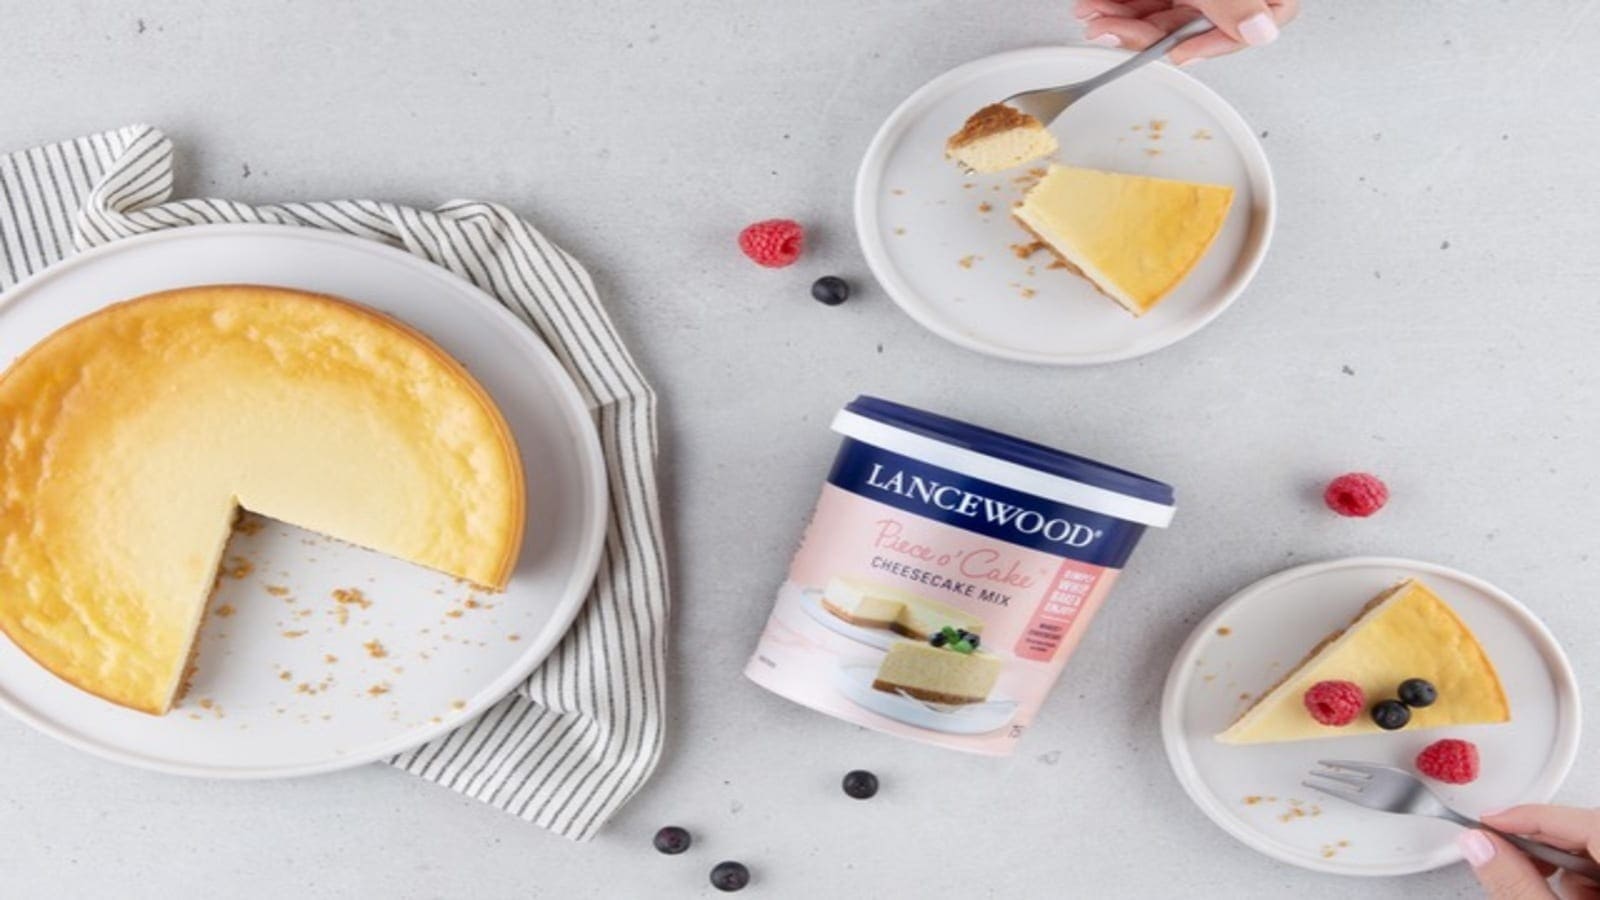 South African cheese maker Lancewood expands offering with launch of instant baked cheesecake mix